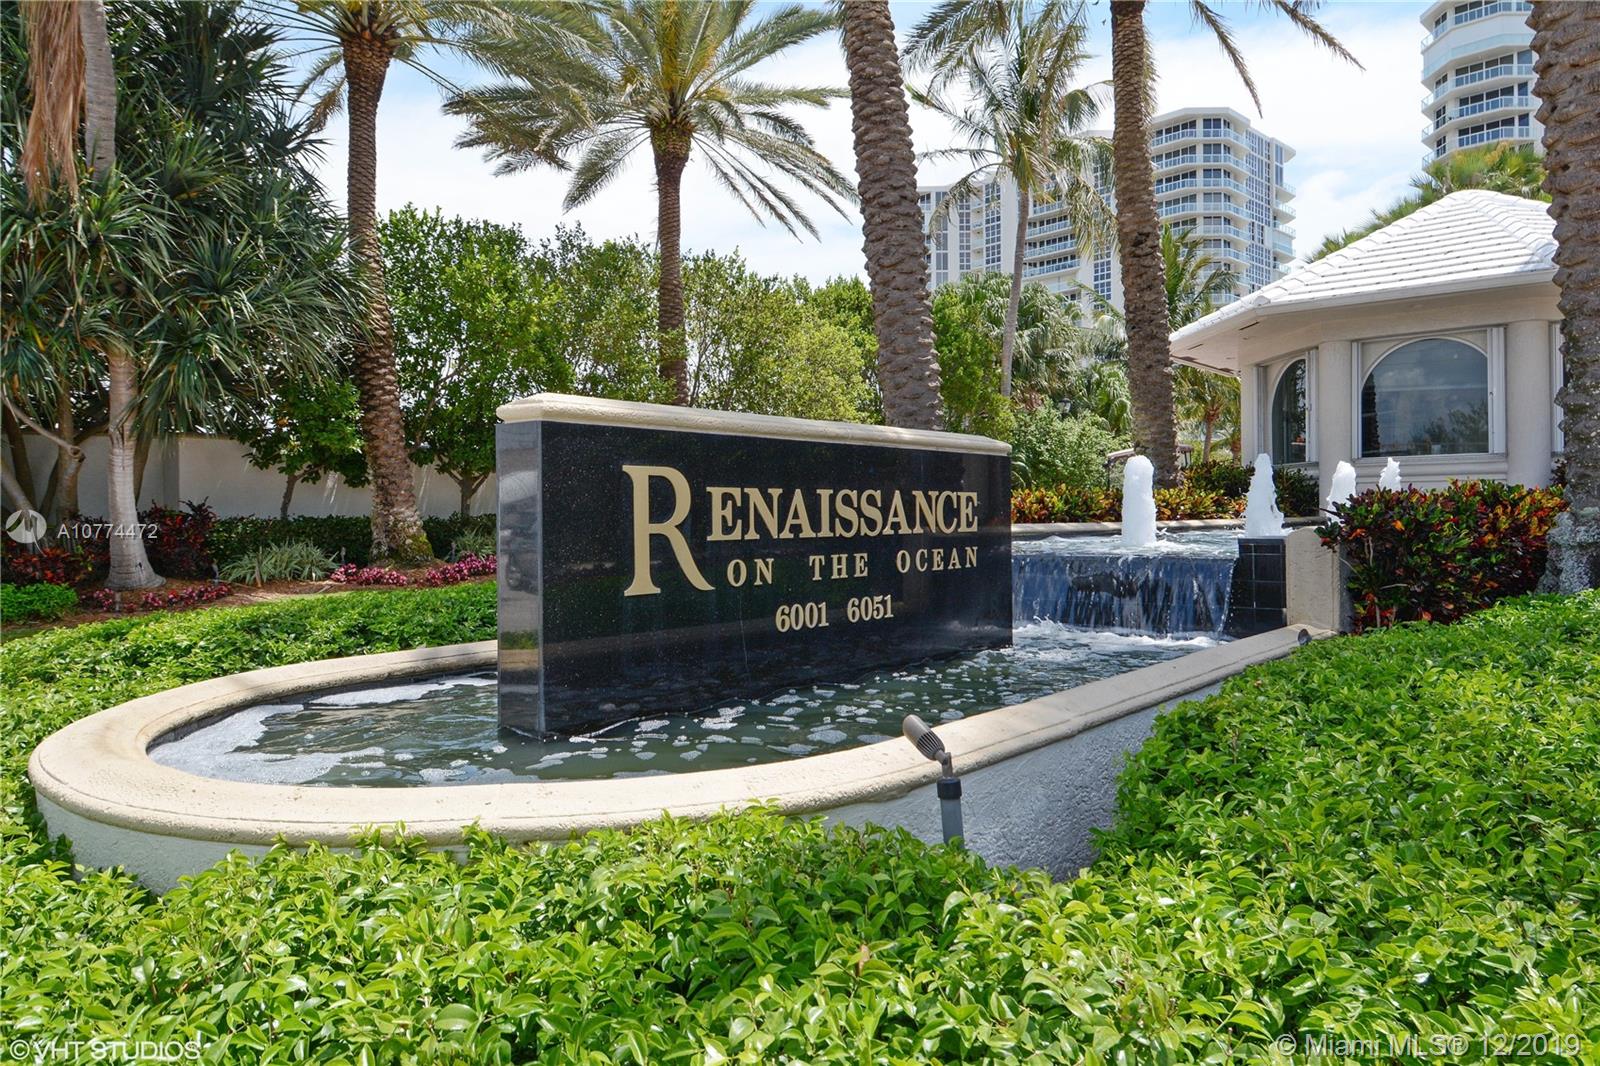 Renaissance On the Ocean Unit 603 Condo for Rent in